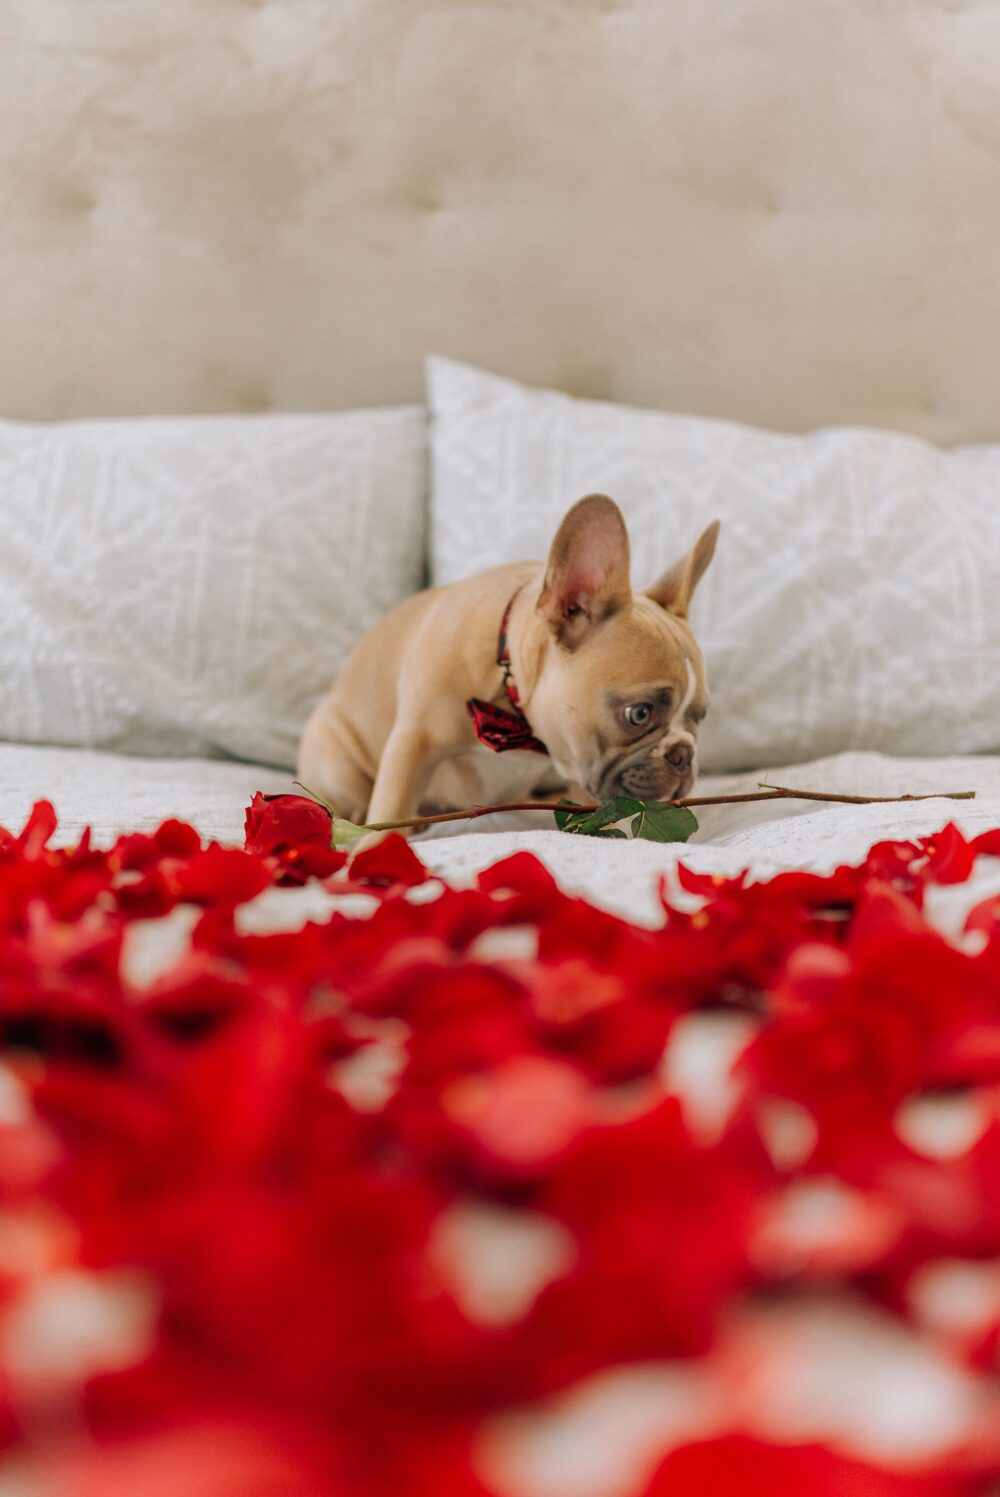 Dog on bed with rose petals